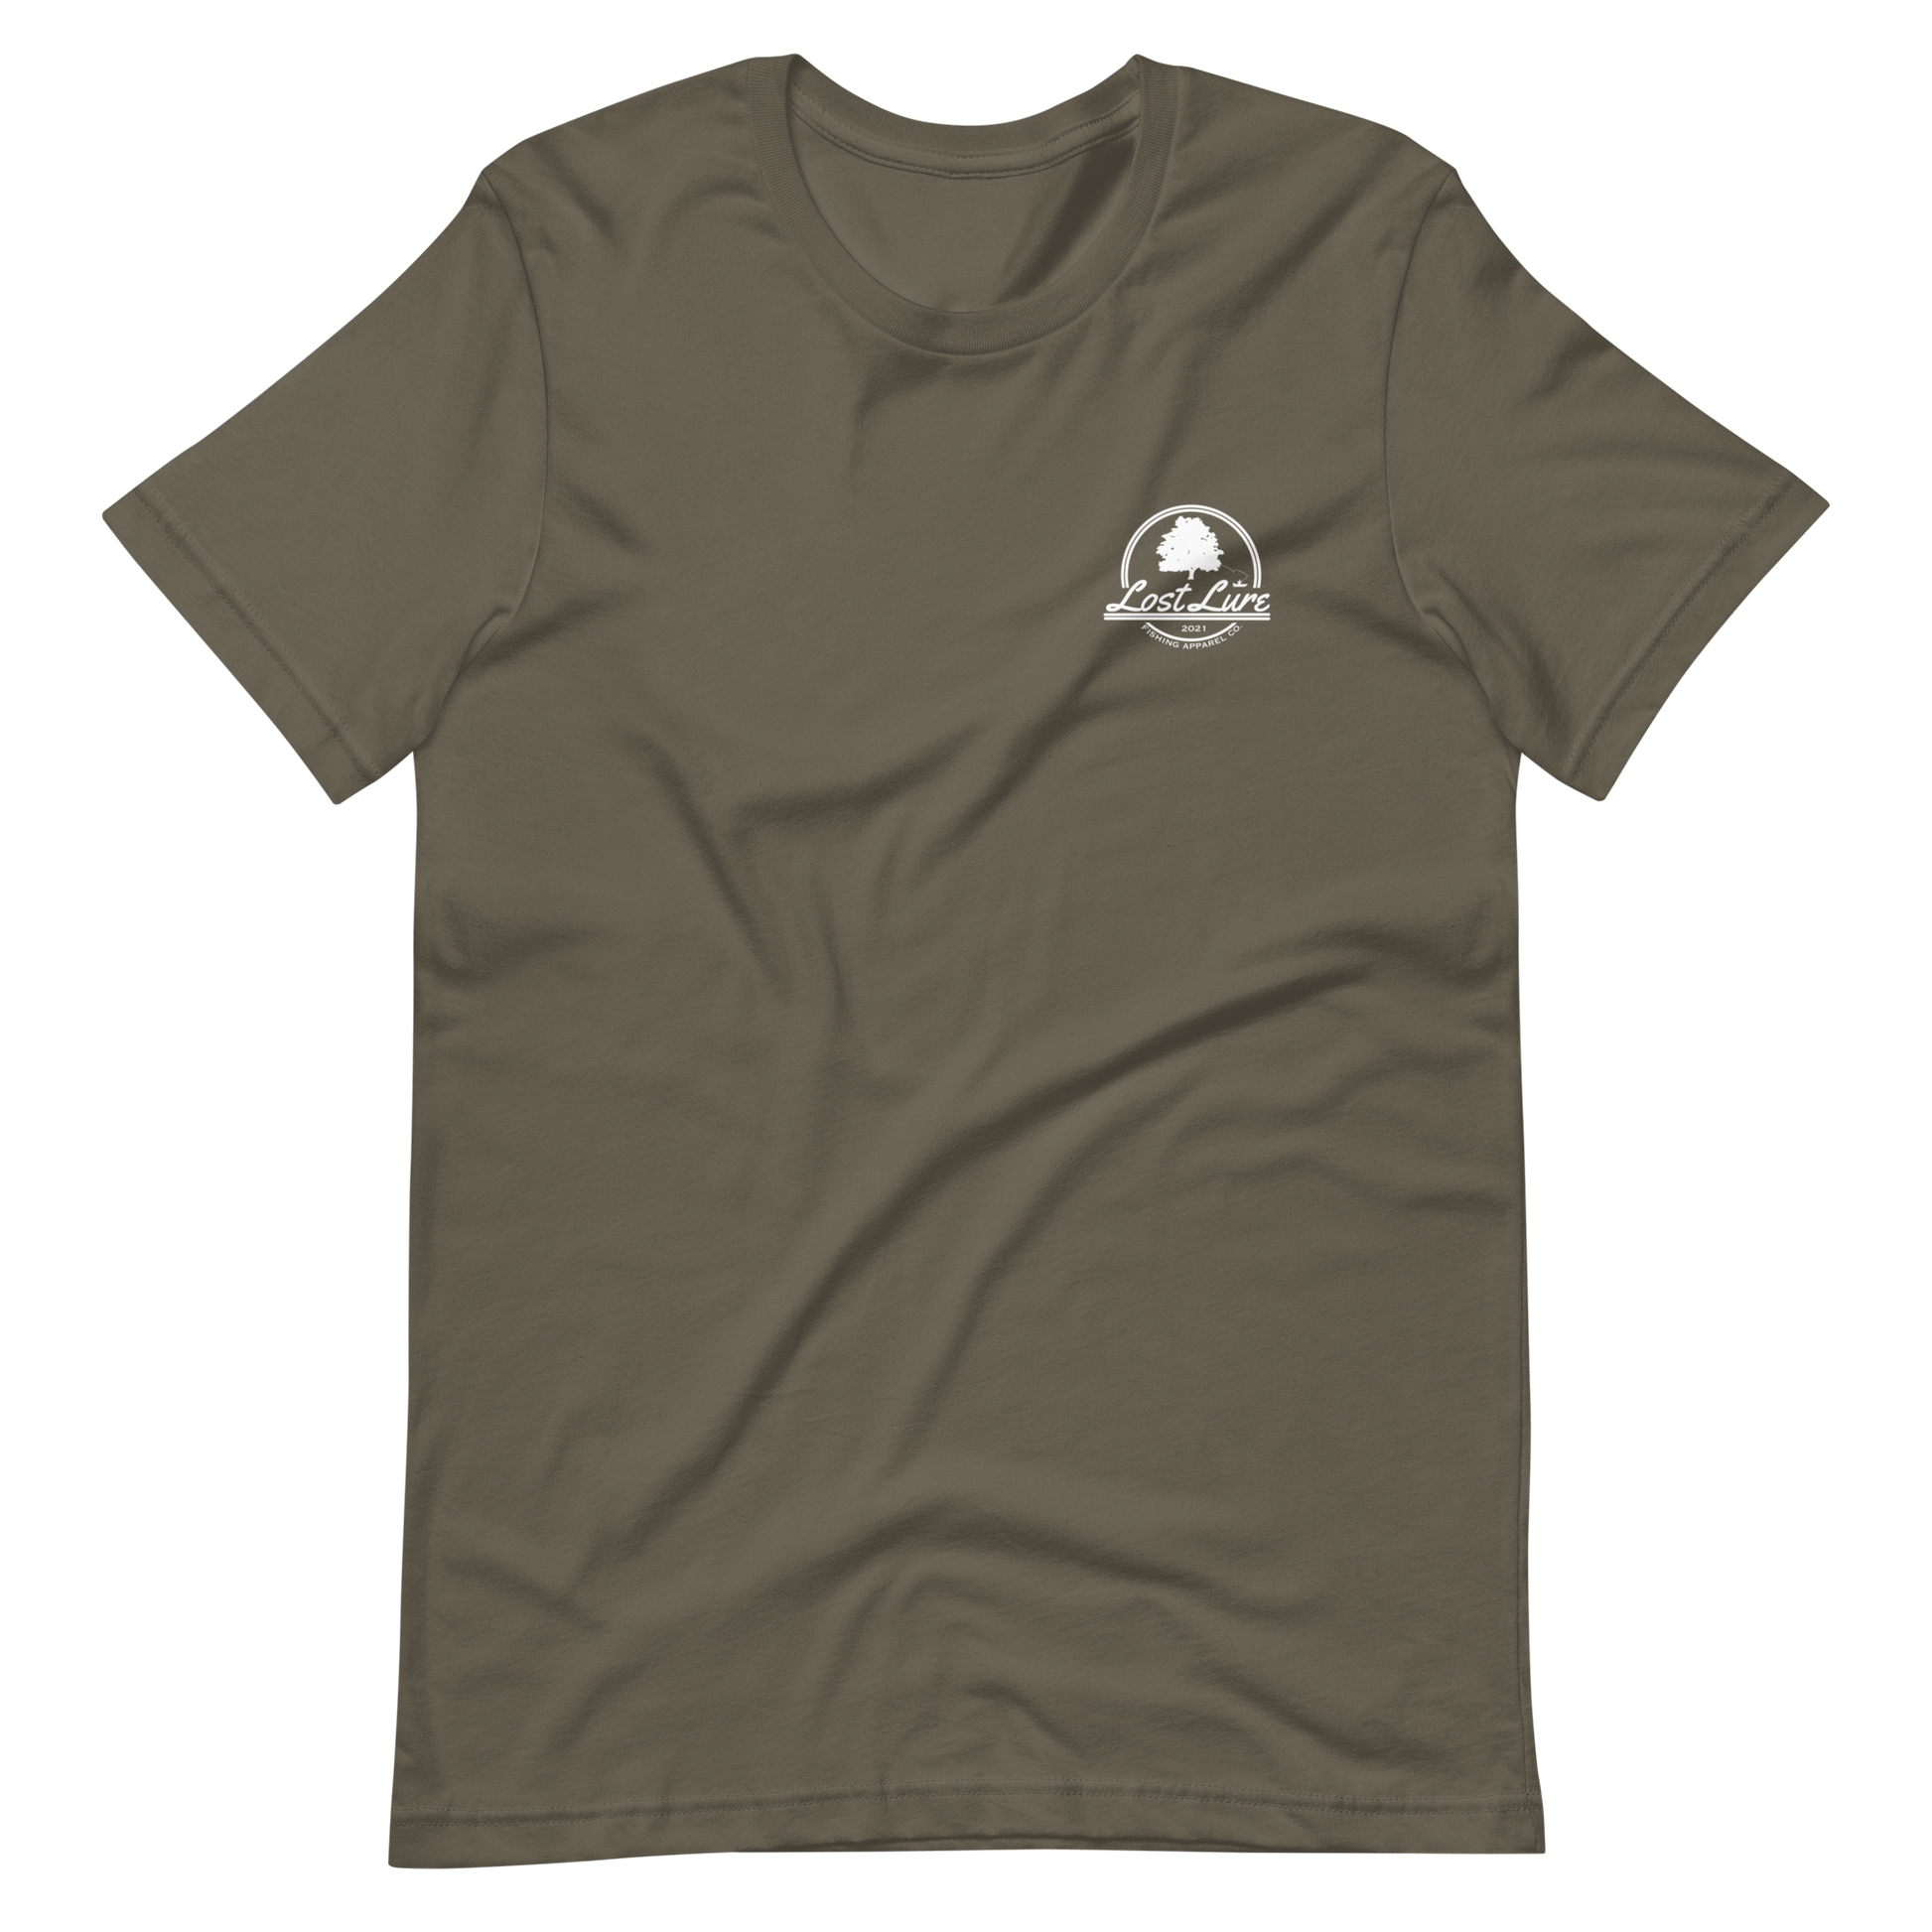 Fly fishing Lost lure shirt. It has a design on the back of the shirt black and white outline a fly fisherman and the Rocky Mountains. Light brown fishing shirt, front side